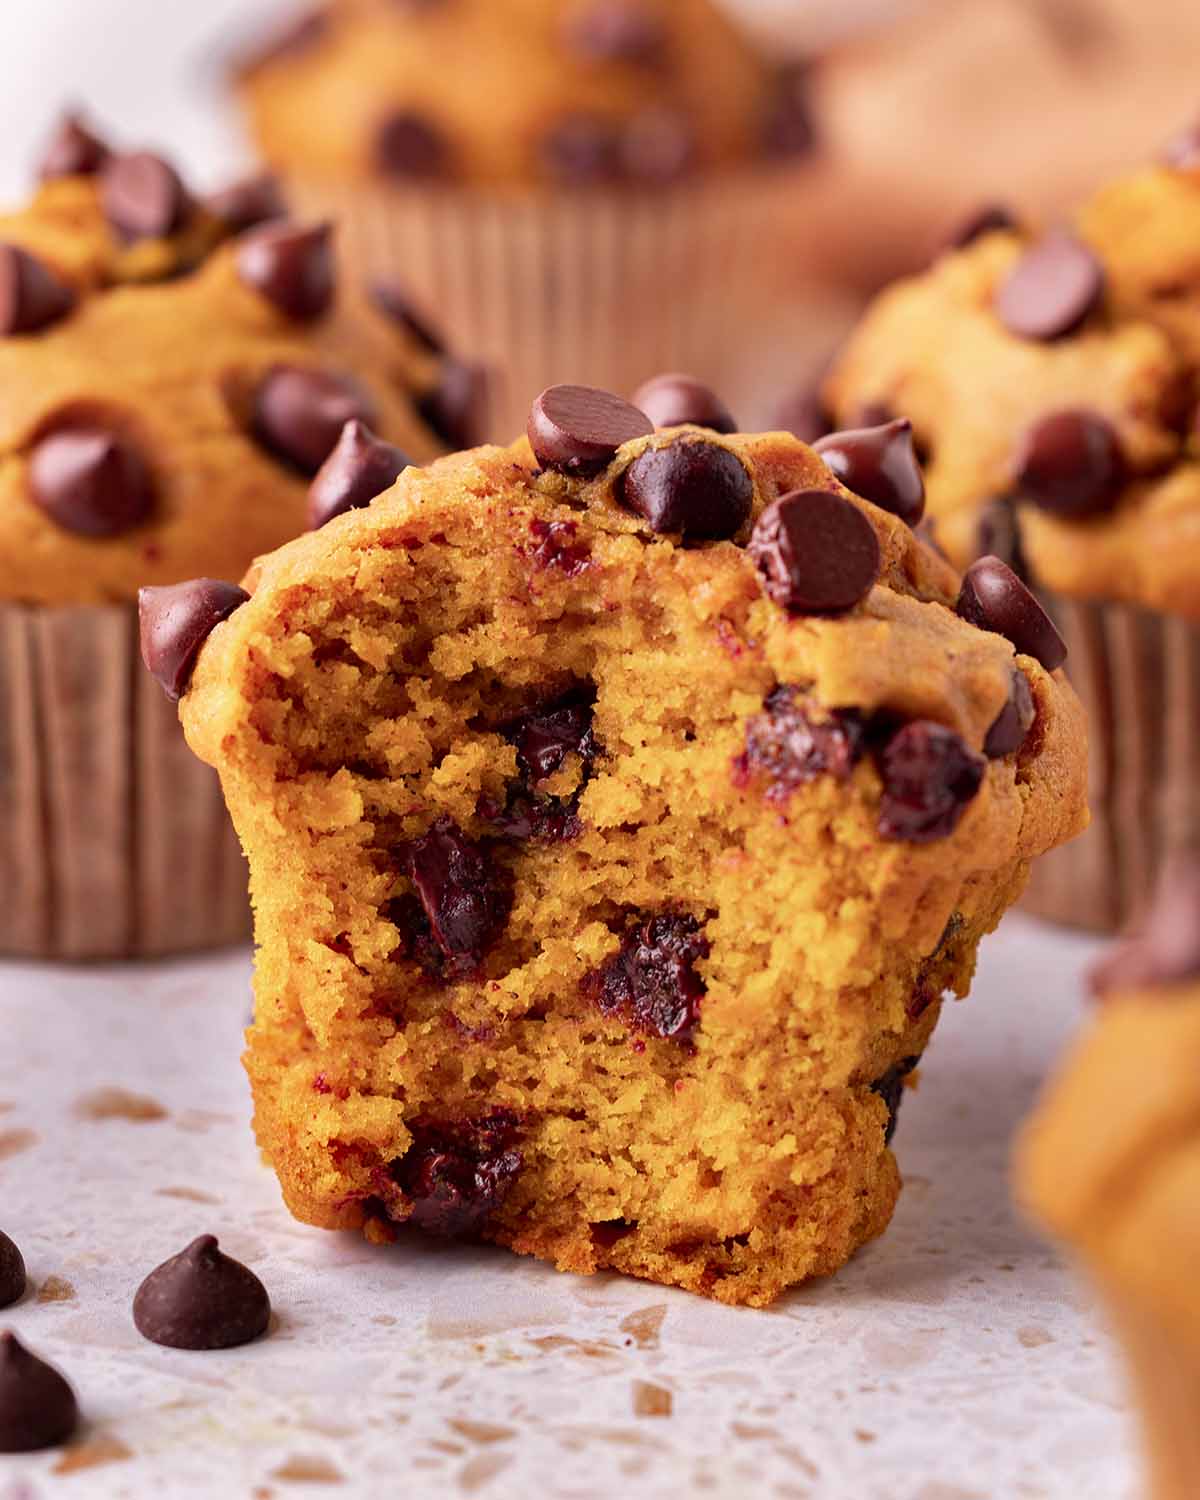 Close up of pumpkin muffin with a bite taken out showing fluffy golden texture and gooey chocolate chips.